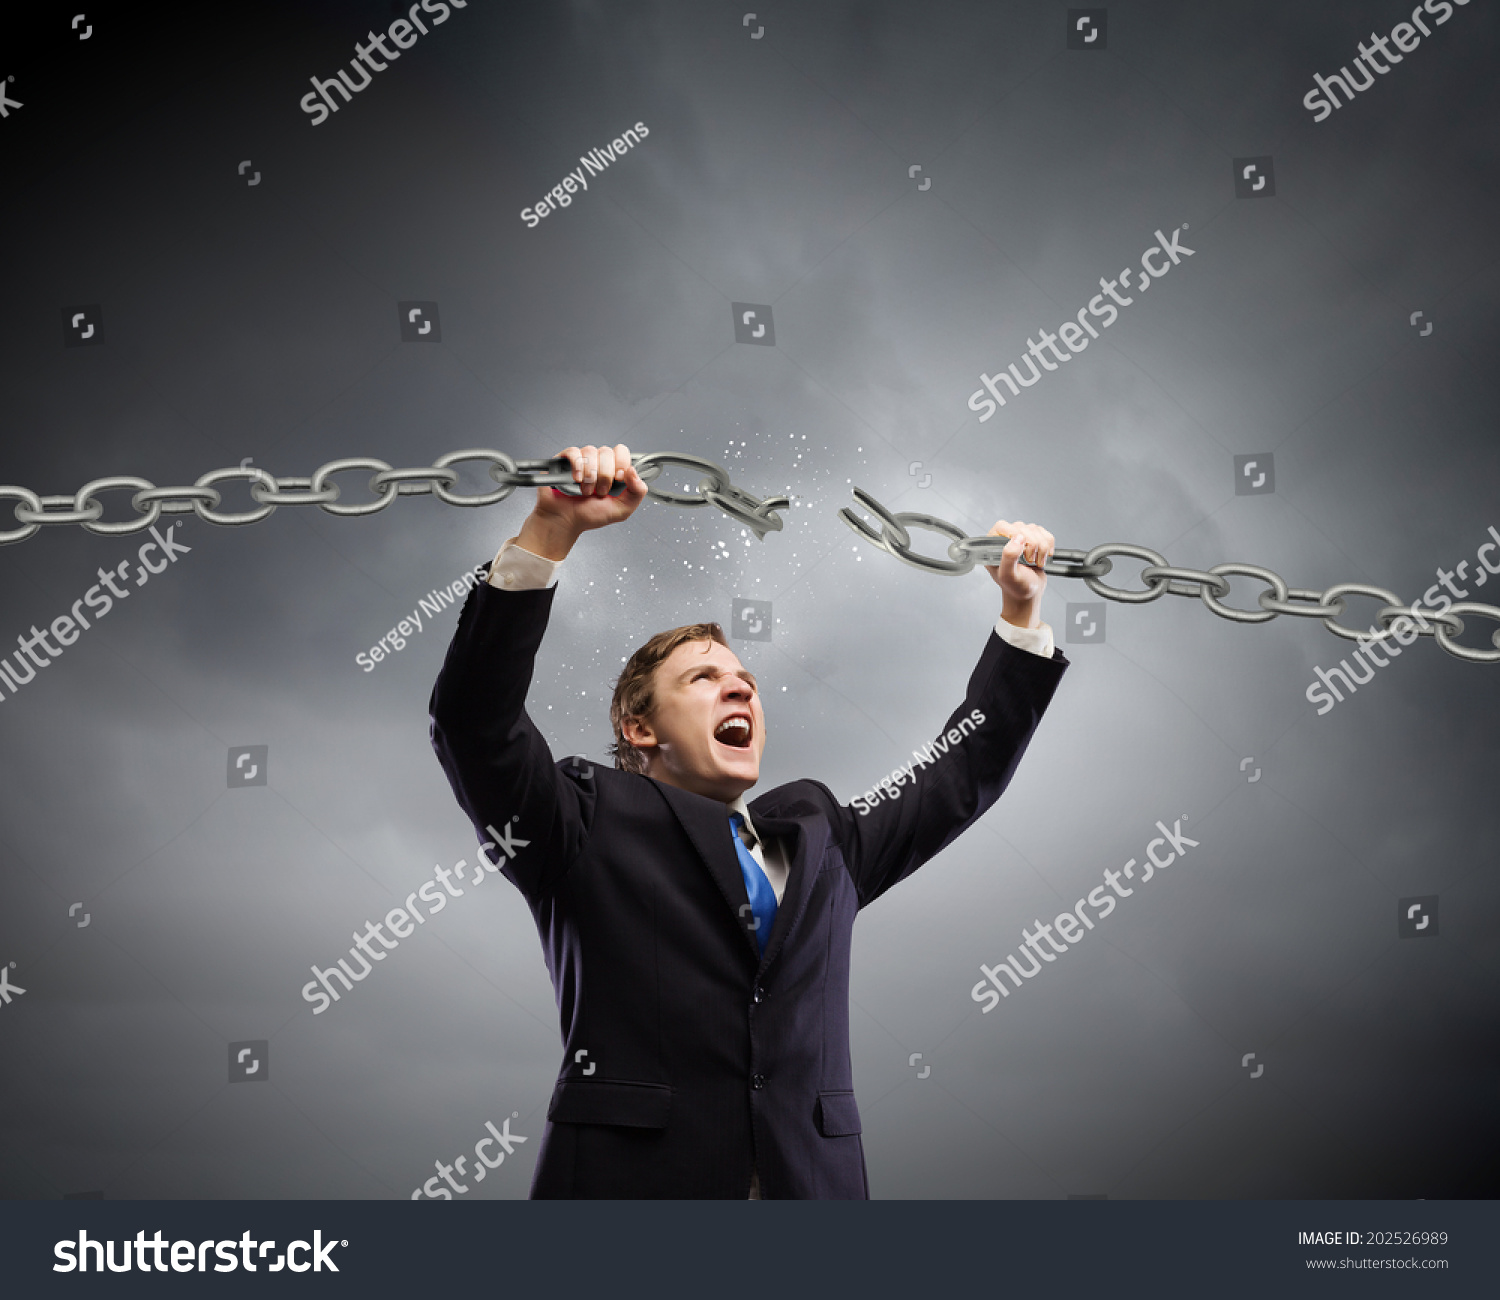 stock-photo-young-furious-businessman-breaking-metal-chain-with-hands-202526989.jpg